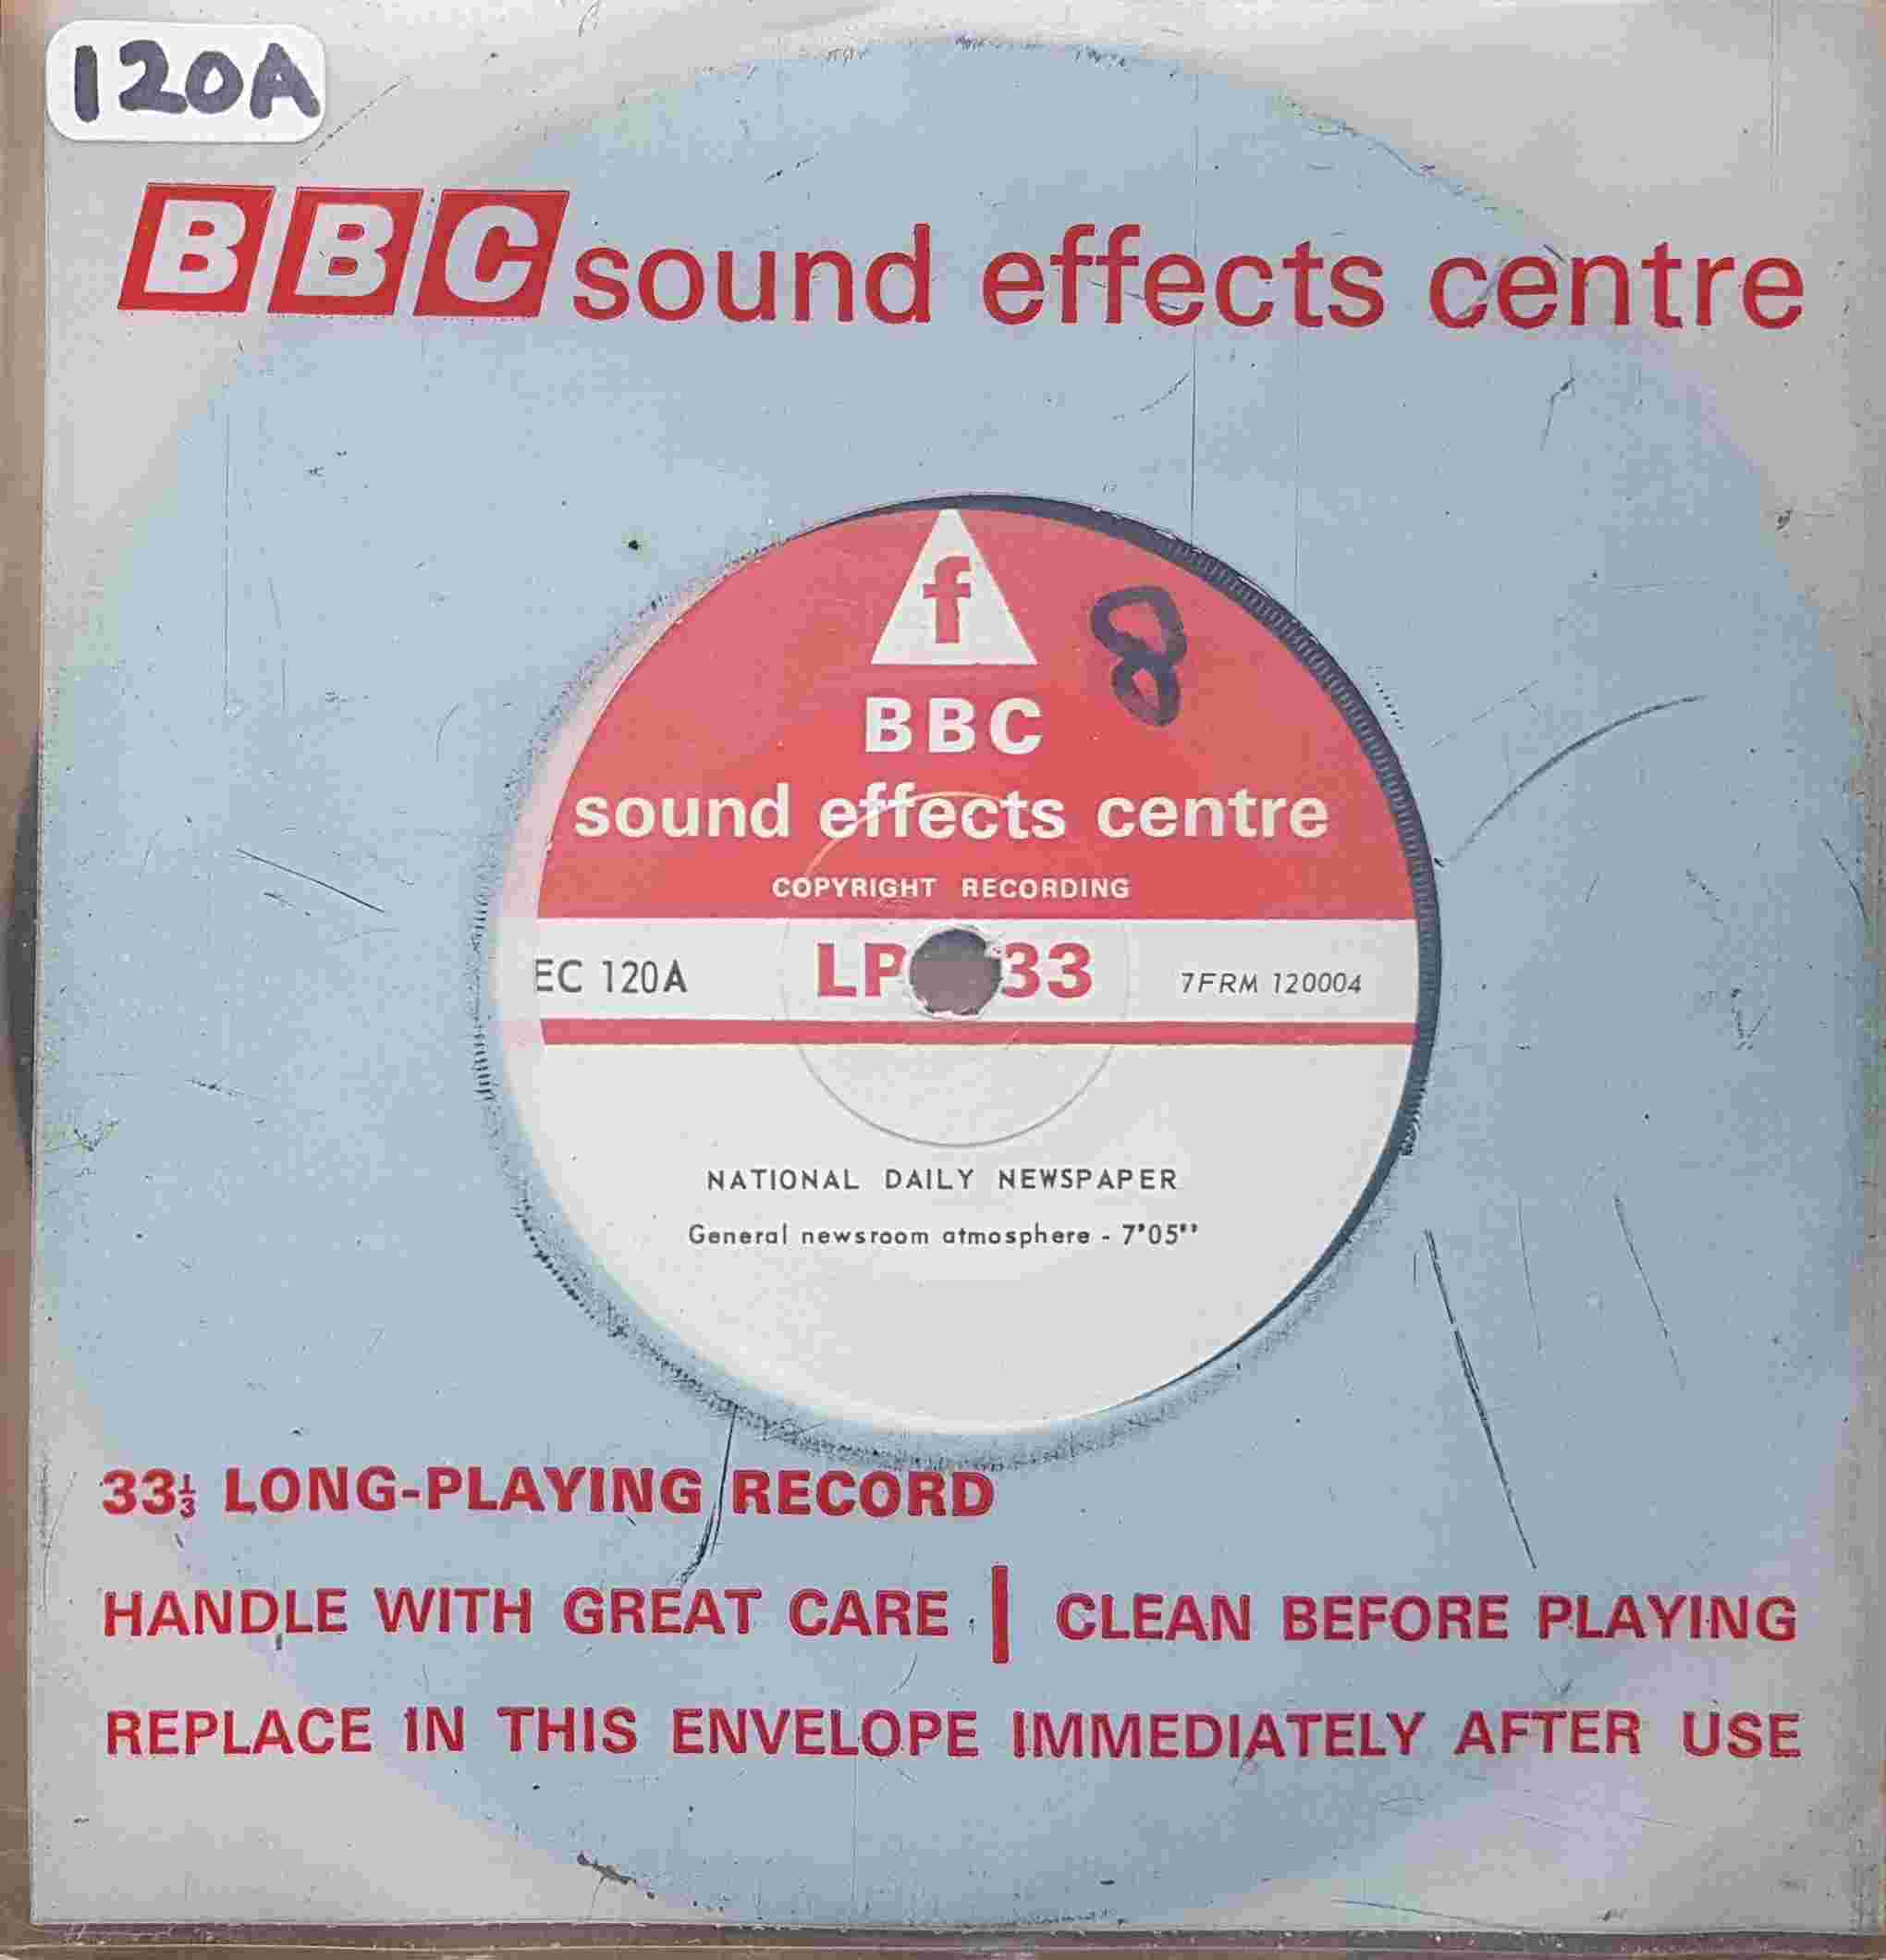 Picture of EC 120A National daily newpaper by artist Not registered from the BBC singles - Records and Tapes library